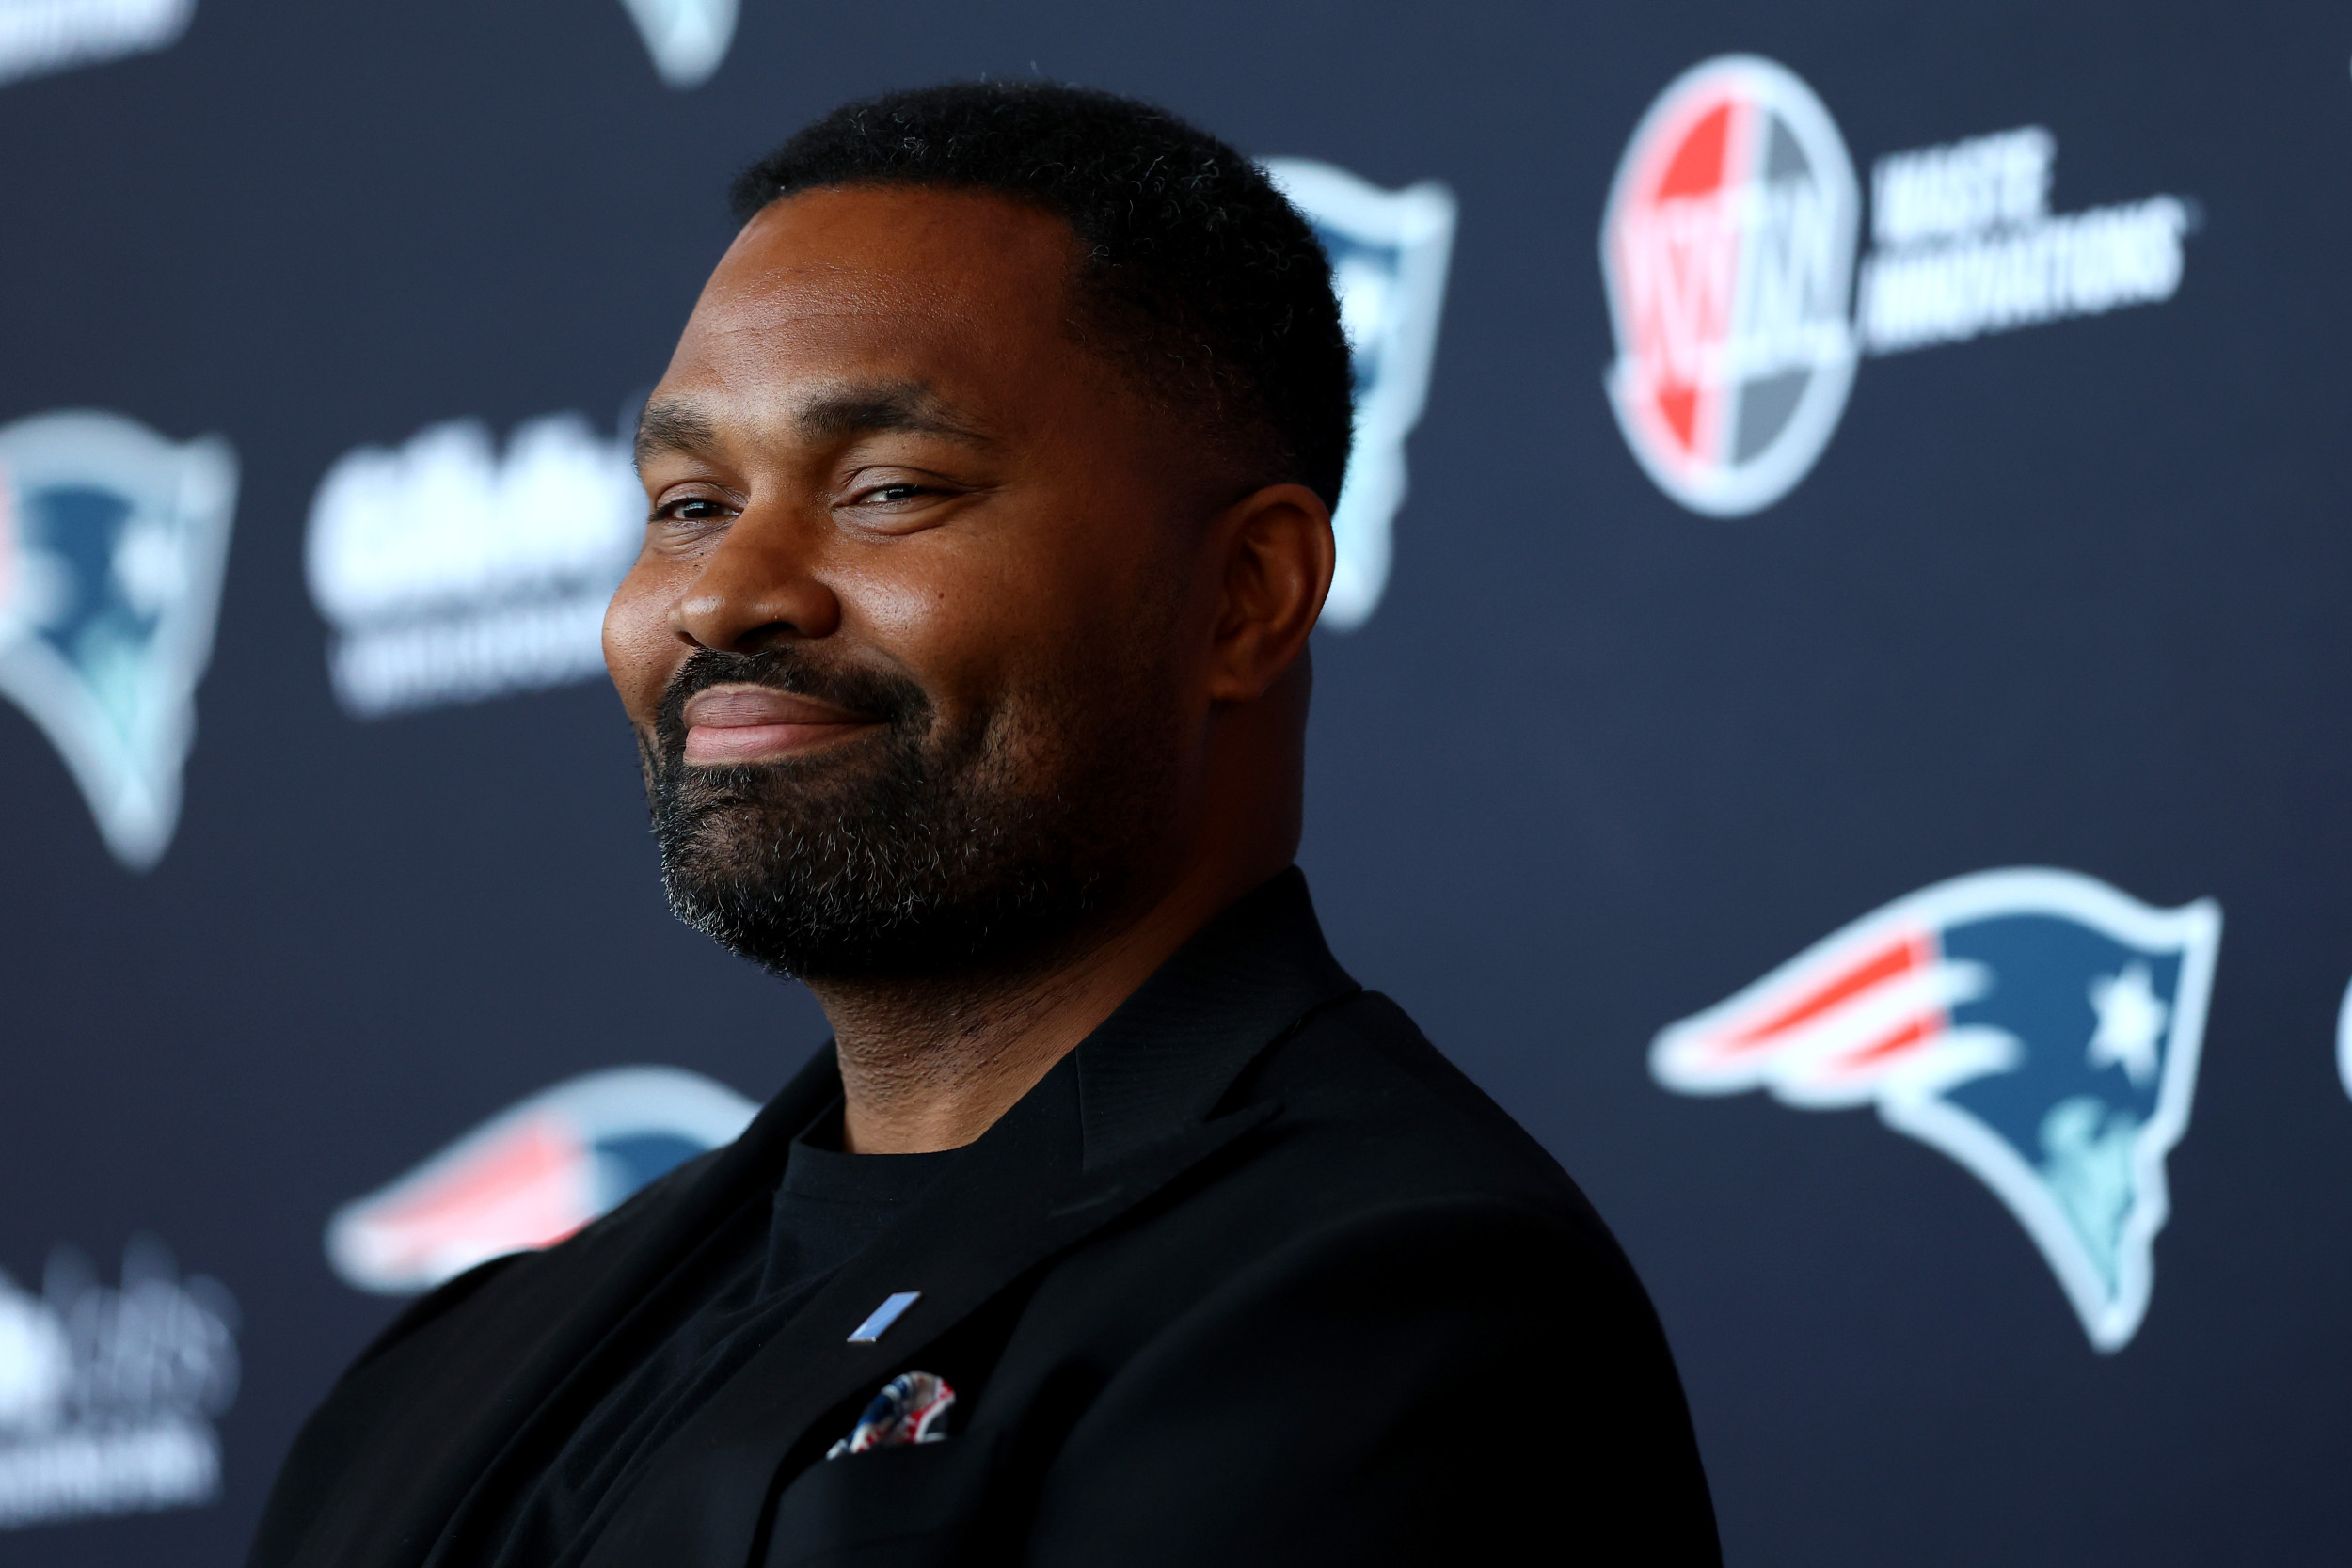  New Coach, Big Dreams: How Jerod Mayo's Plan Could Change the Patriots' Game